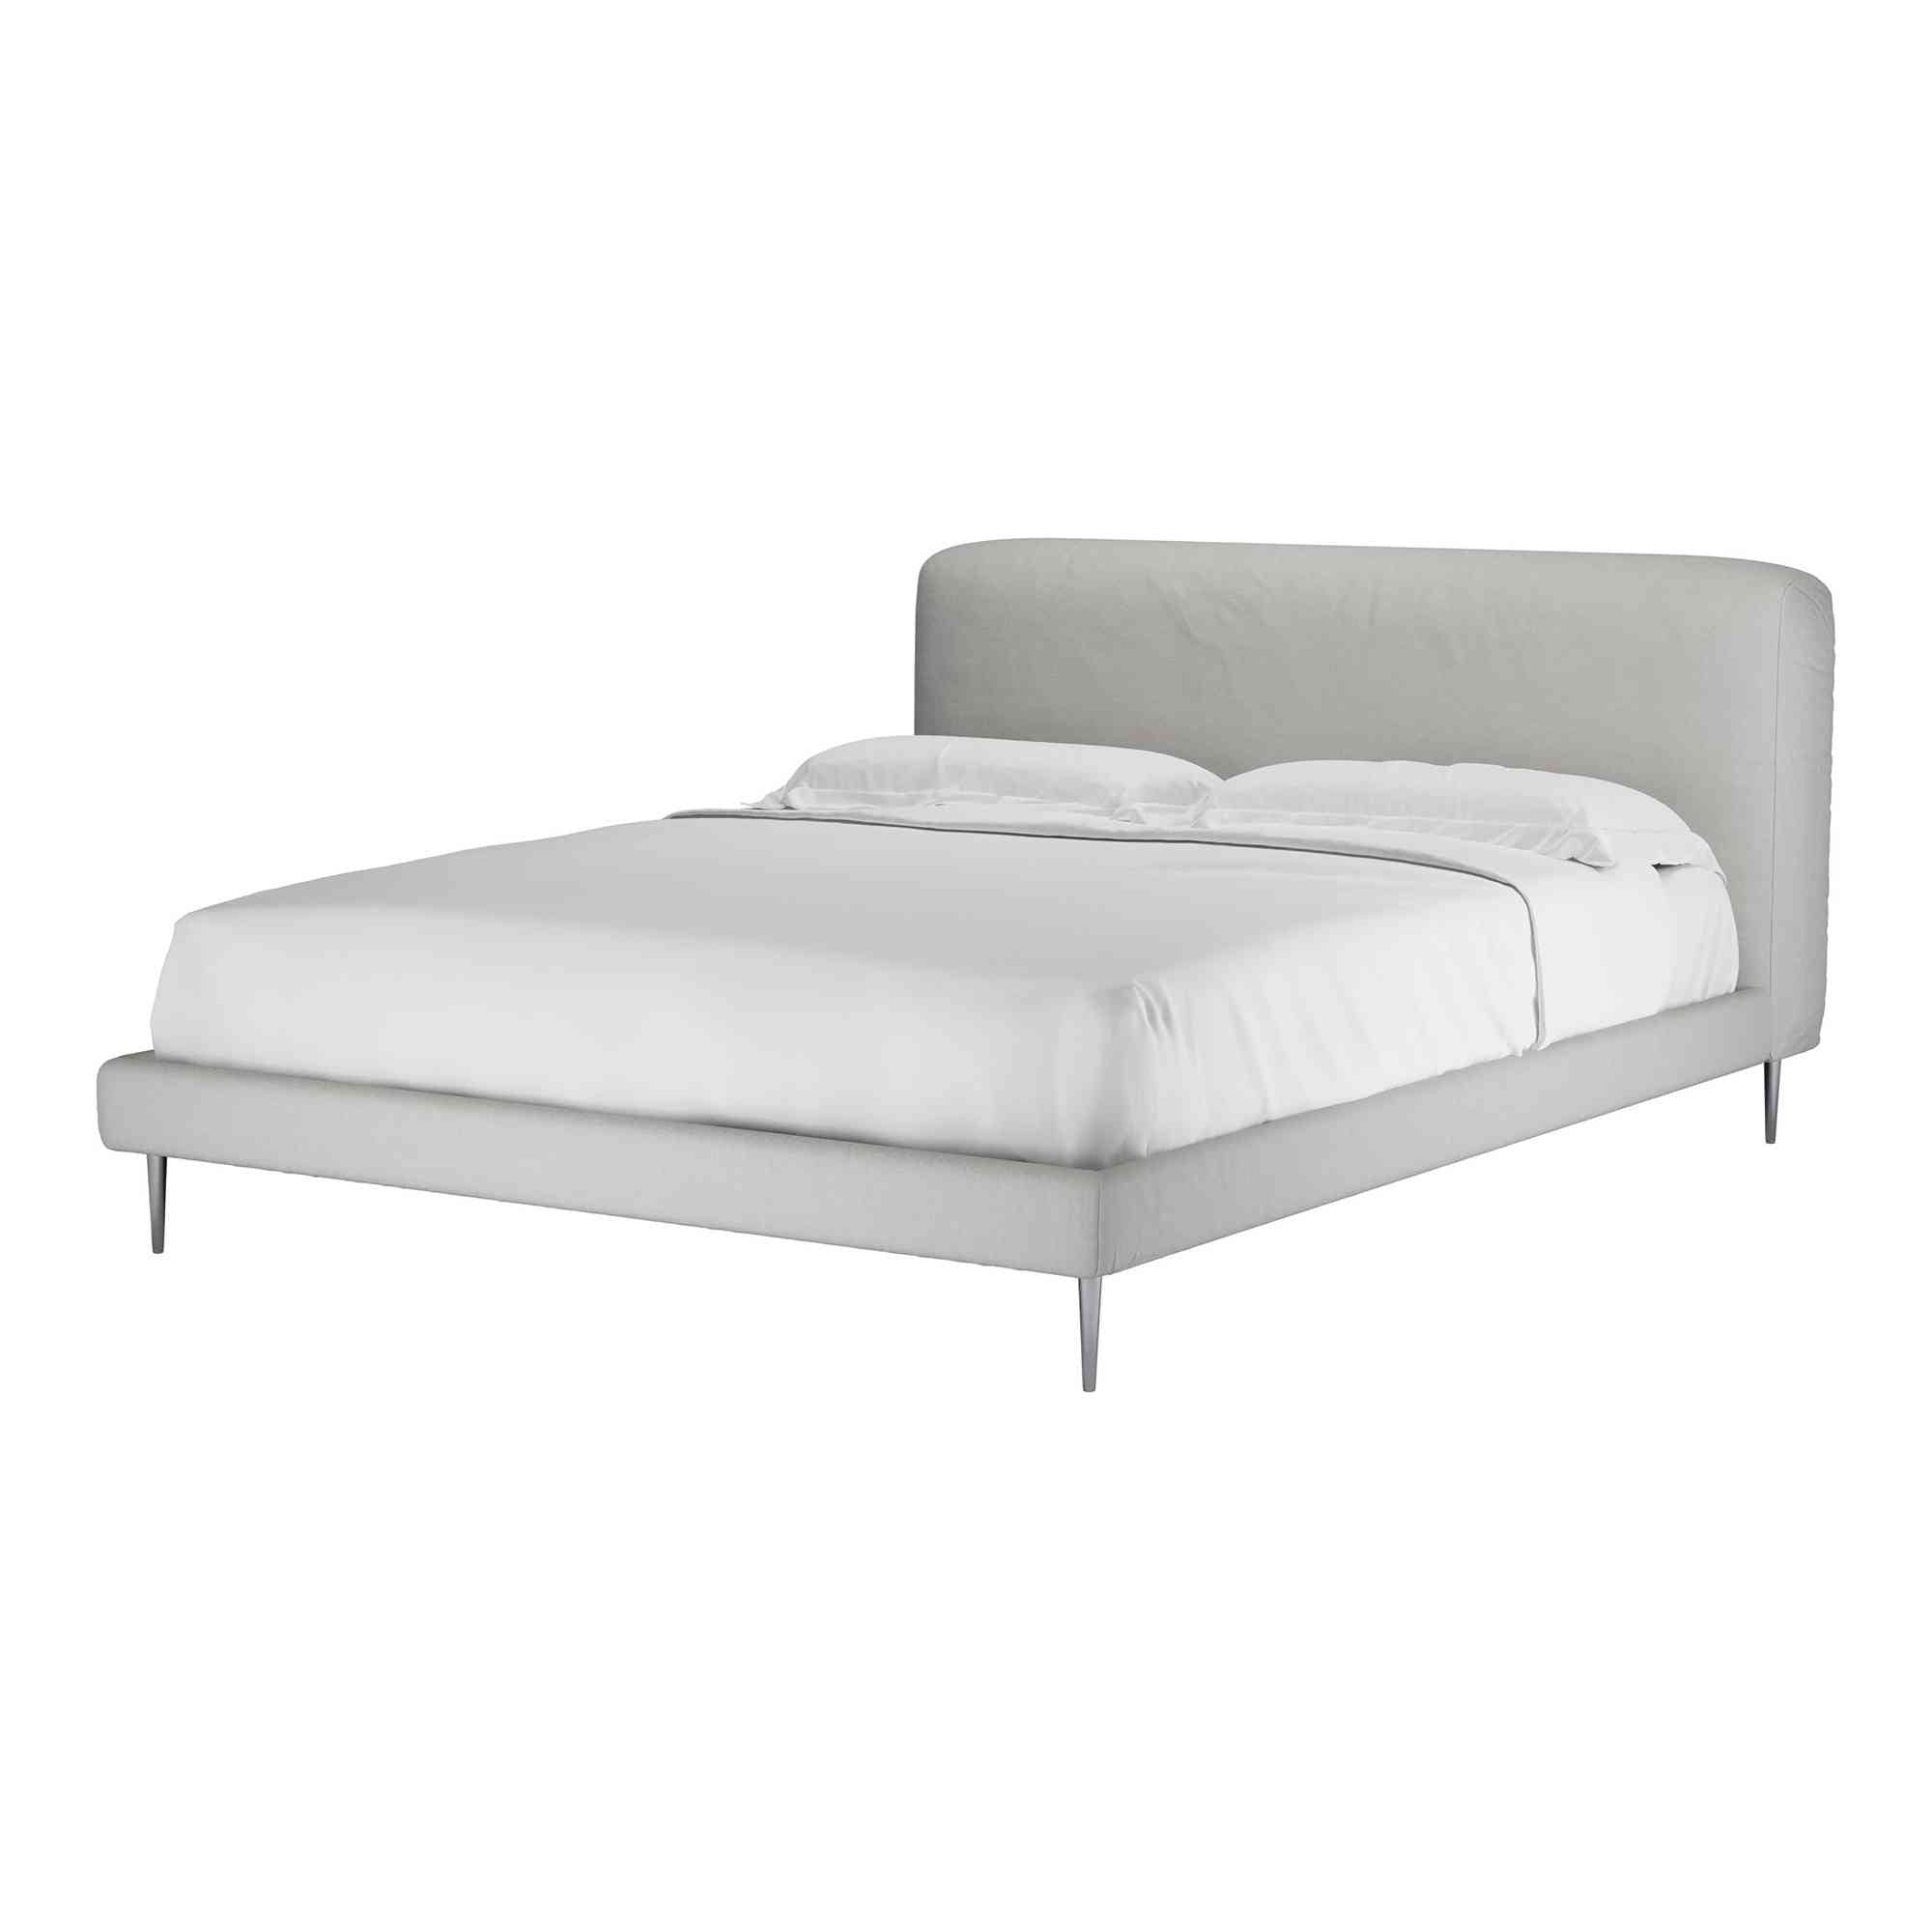 Lucy Alabaster Brushed Linen Cotton Bed - King Size